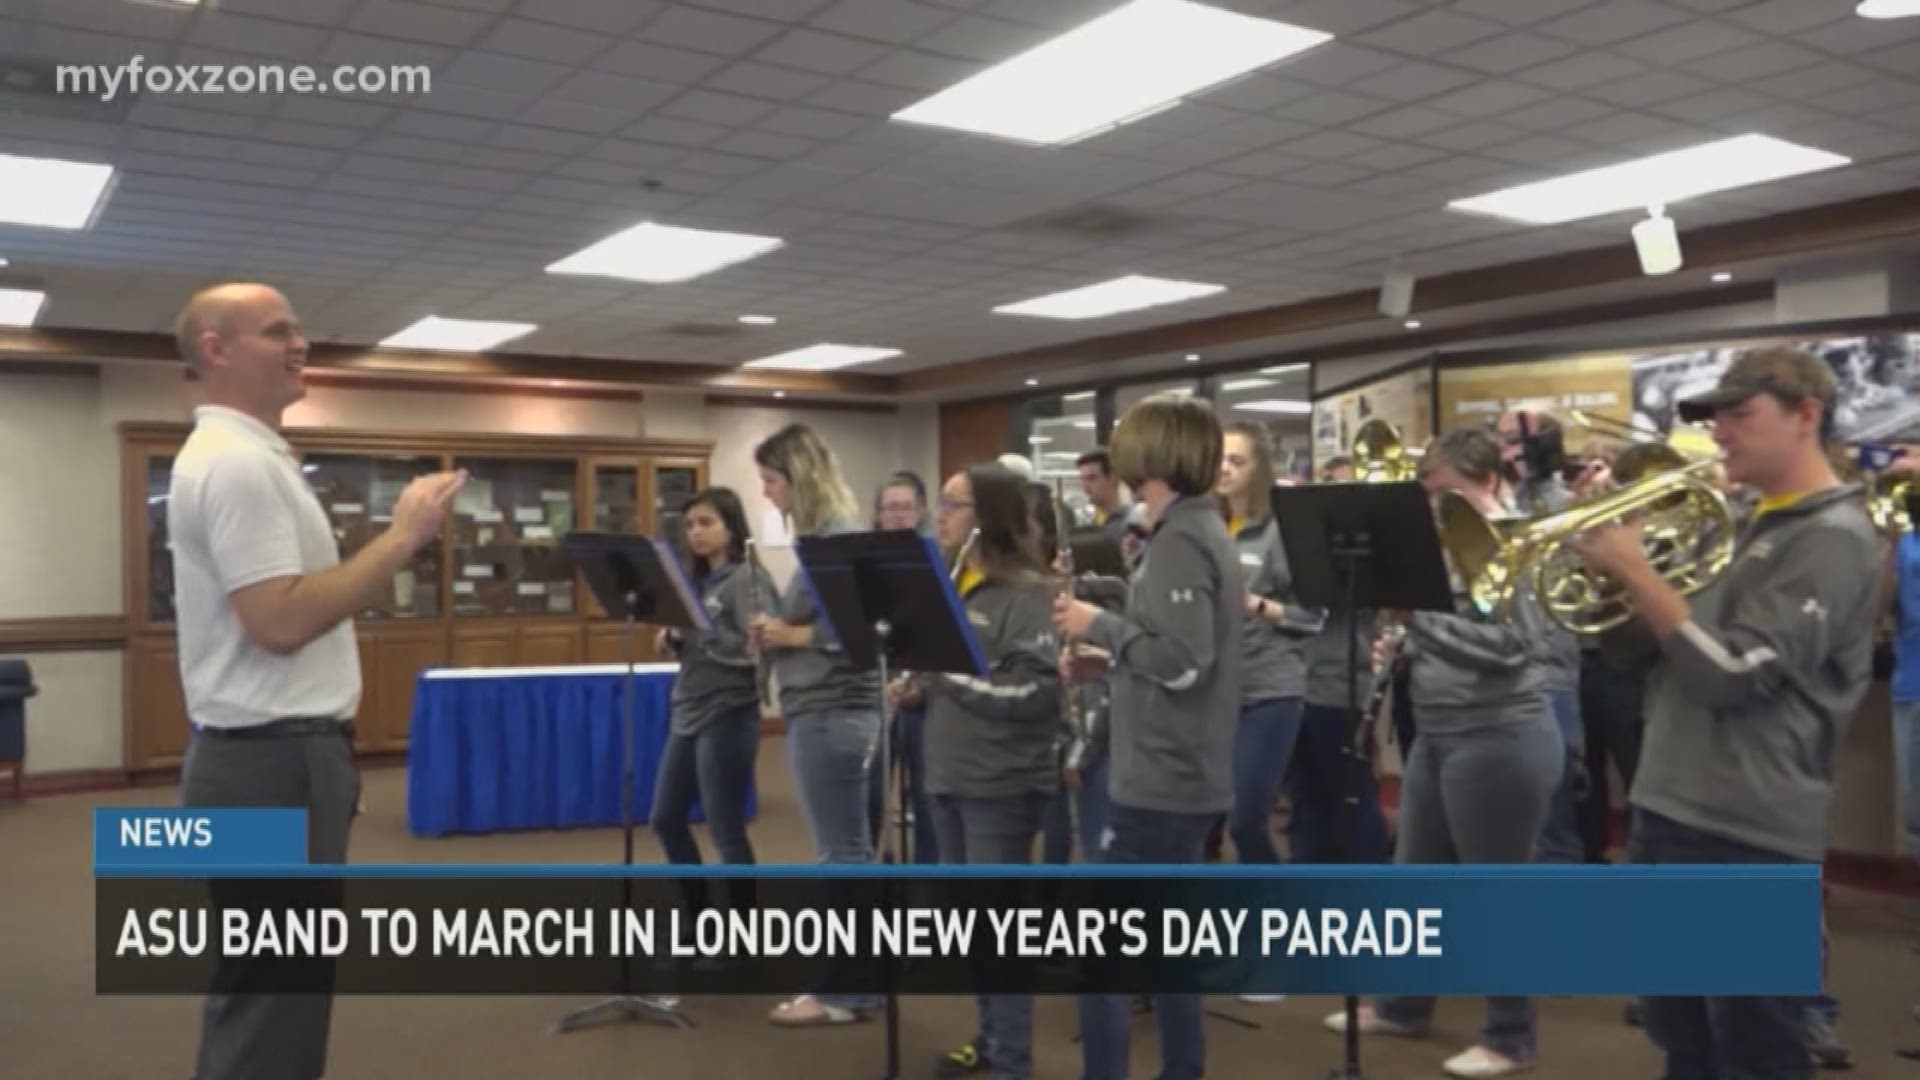 Band invited to perform in London parade.